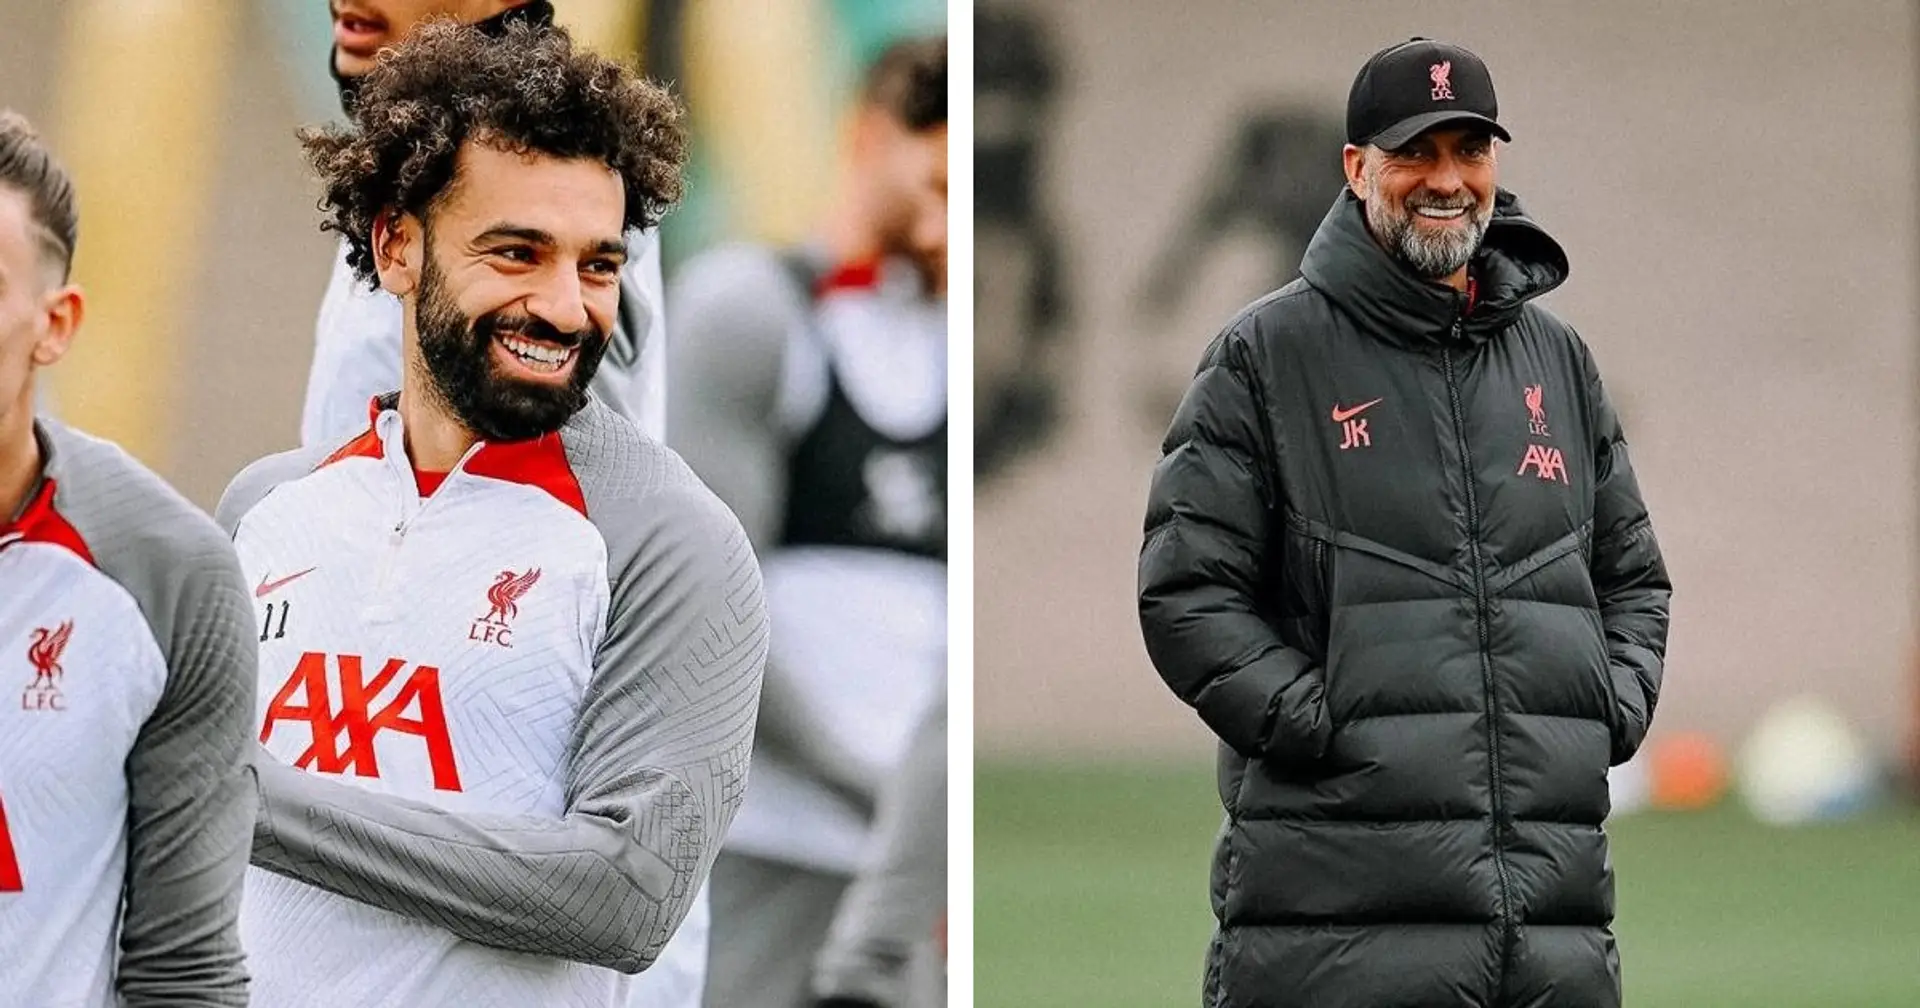 14 best images as Liverpool train ahead of Man United clash